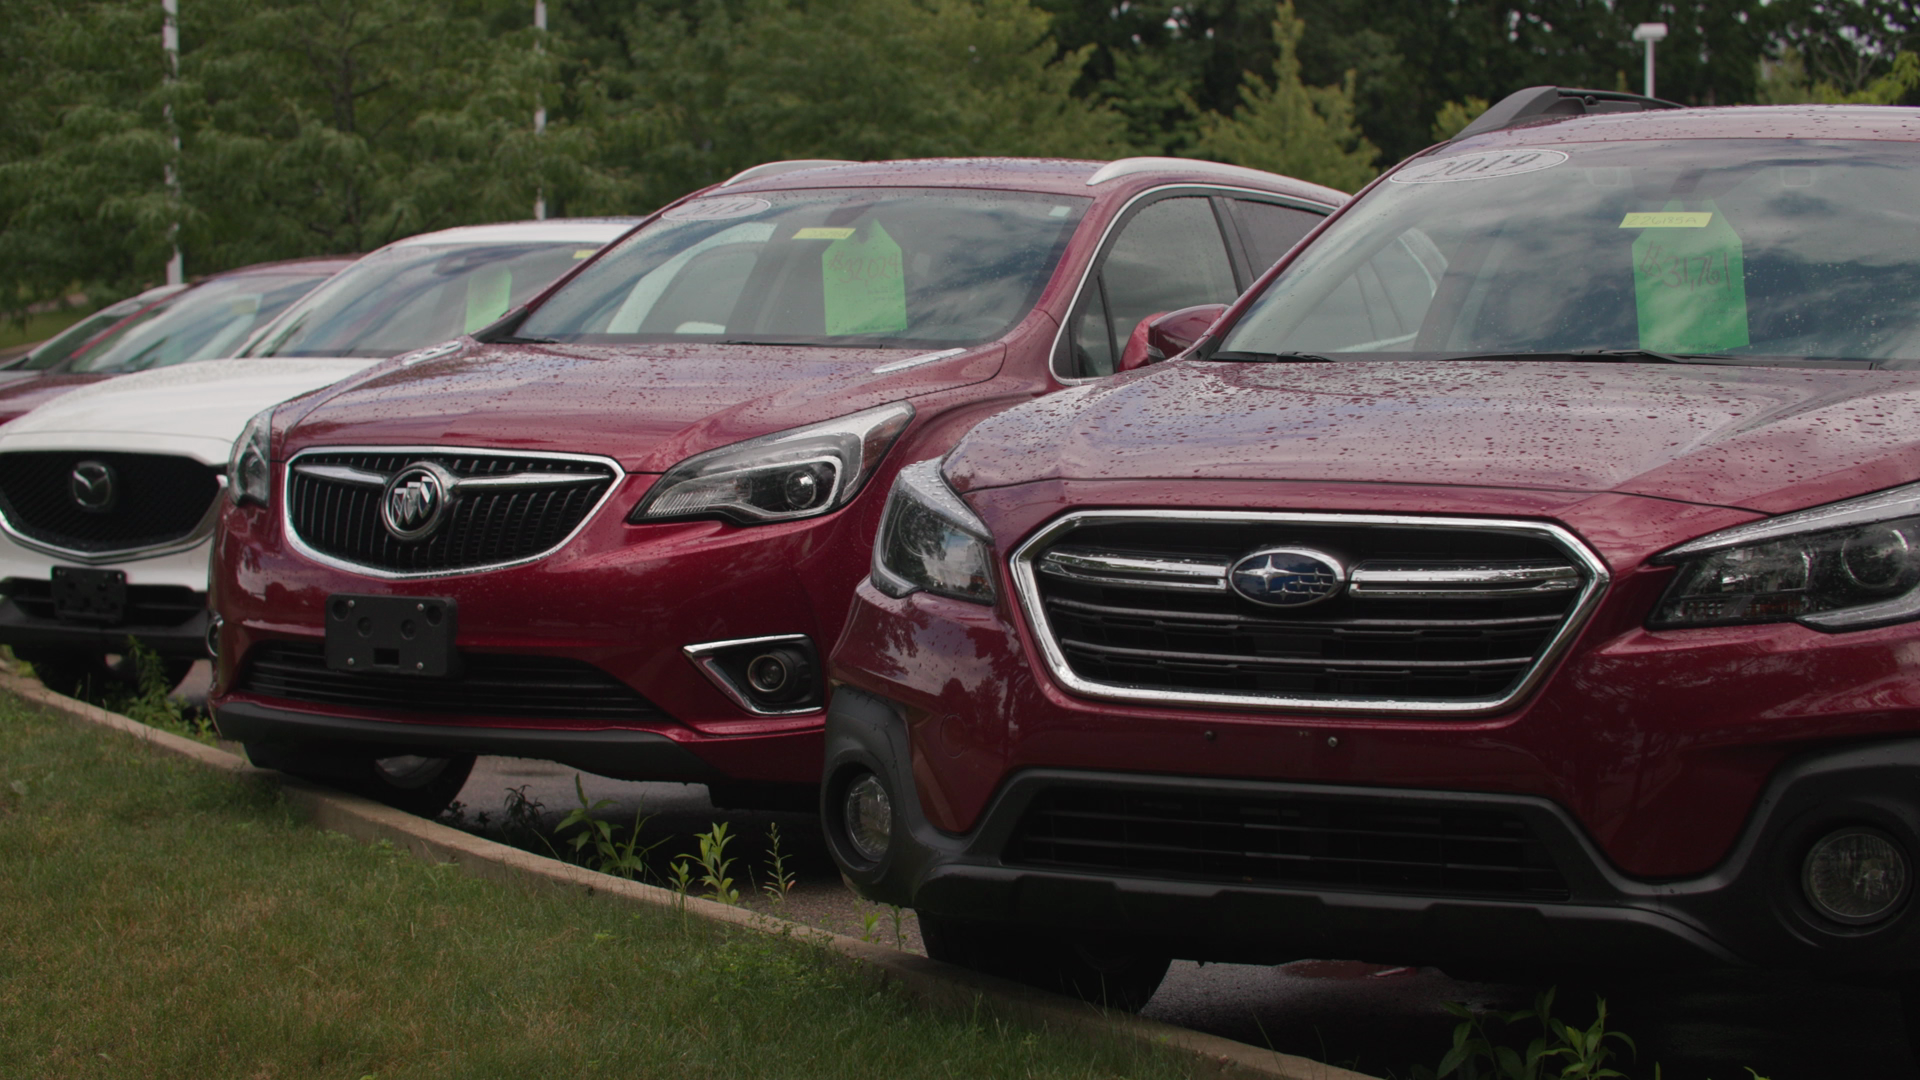 A row of parked SUVs for sale show price takes behind their front windshields.